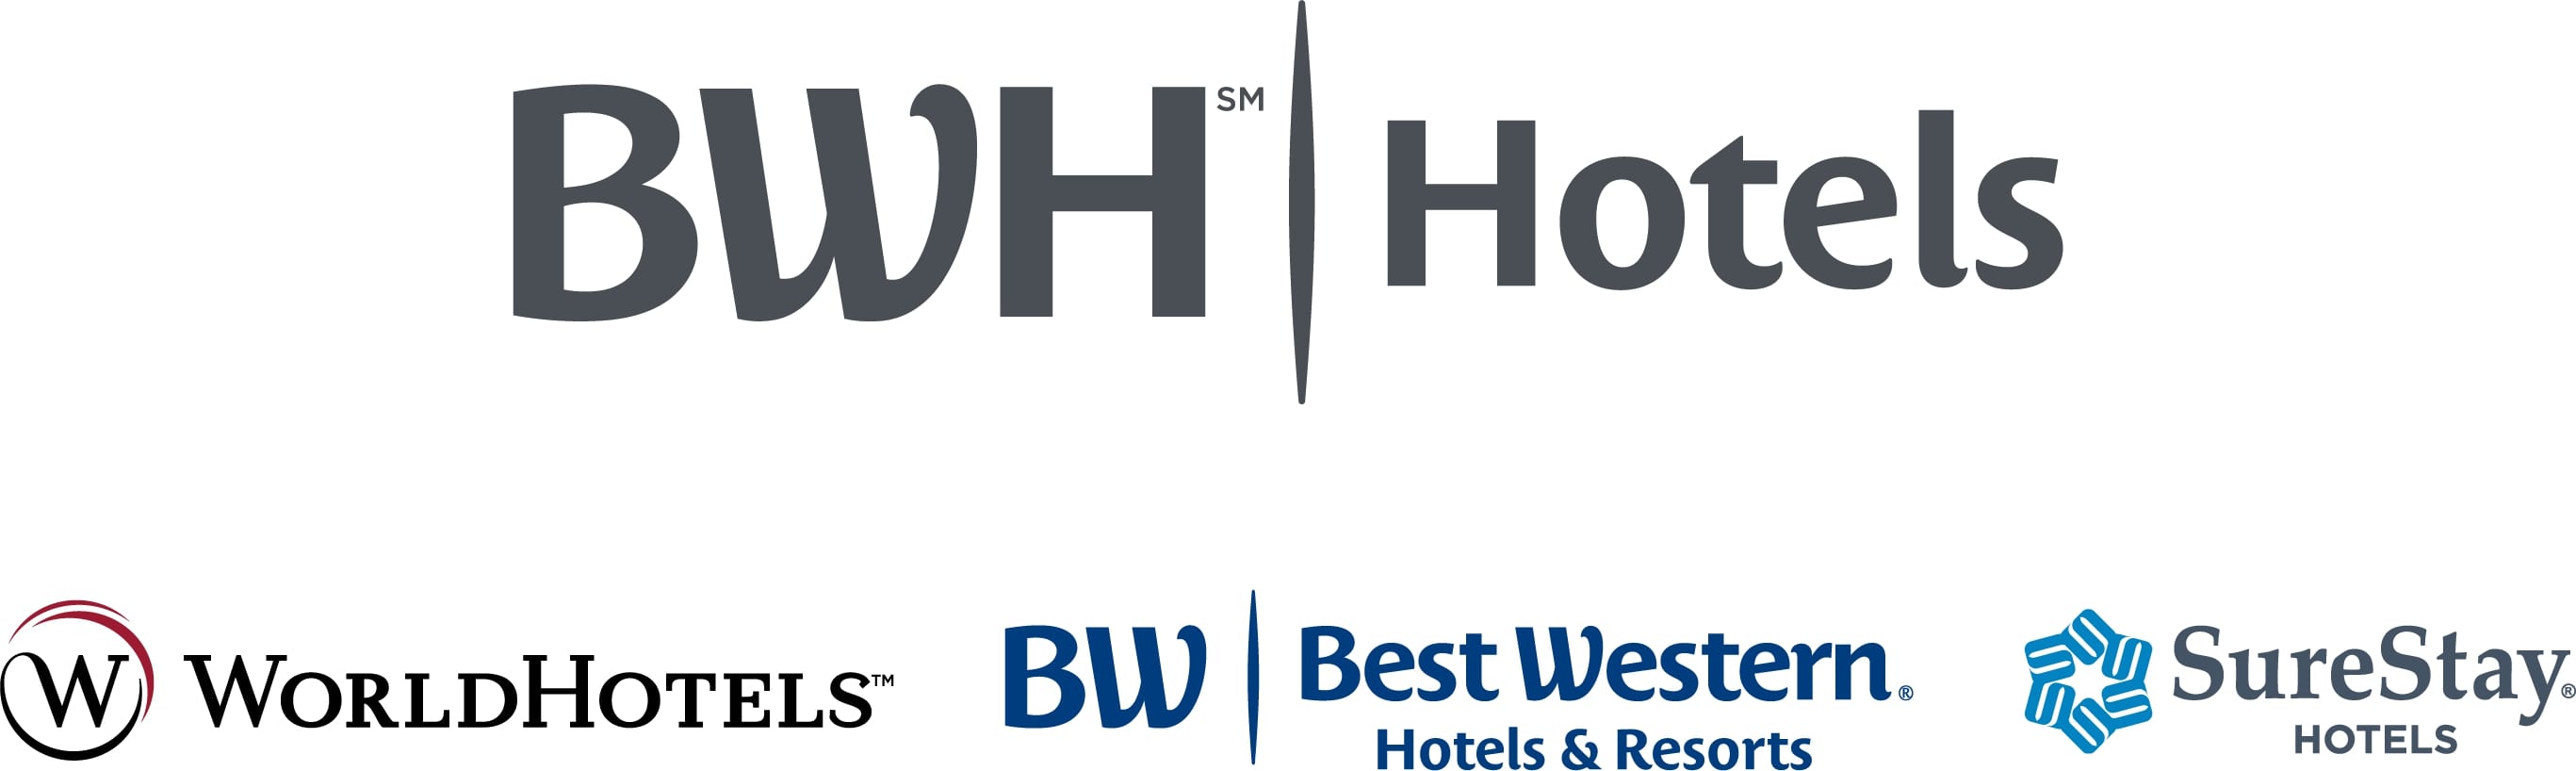 BWH_Hotels_and_3_Master_Brand_Logos_Stacked_CMYK.jpg